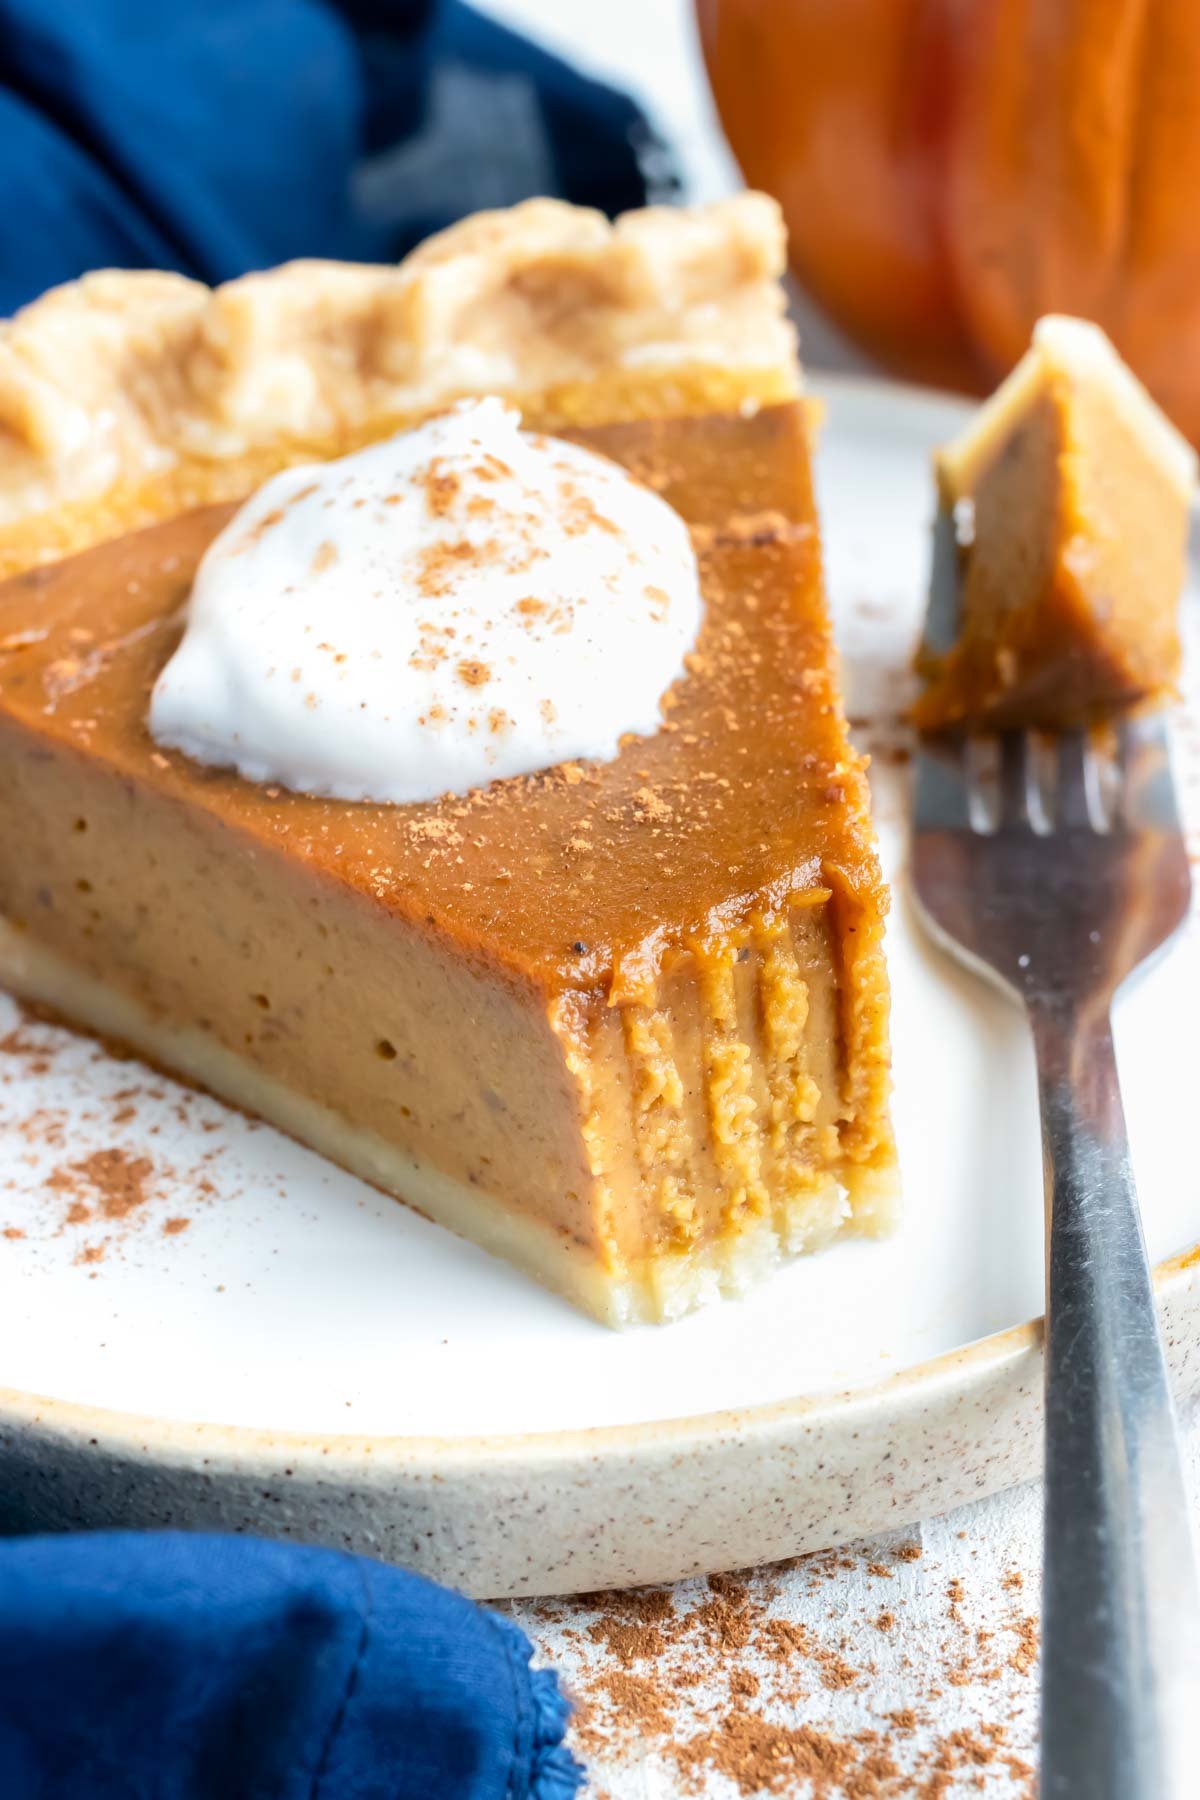 A bite has been taken out of a slice of pumpkin pie.